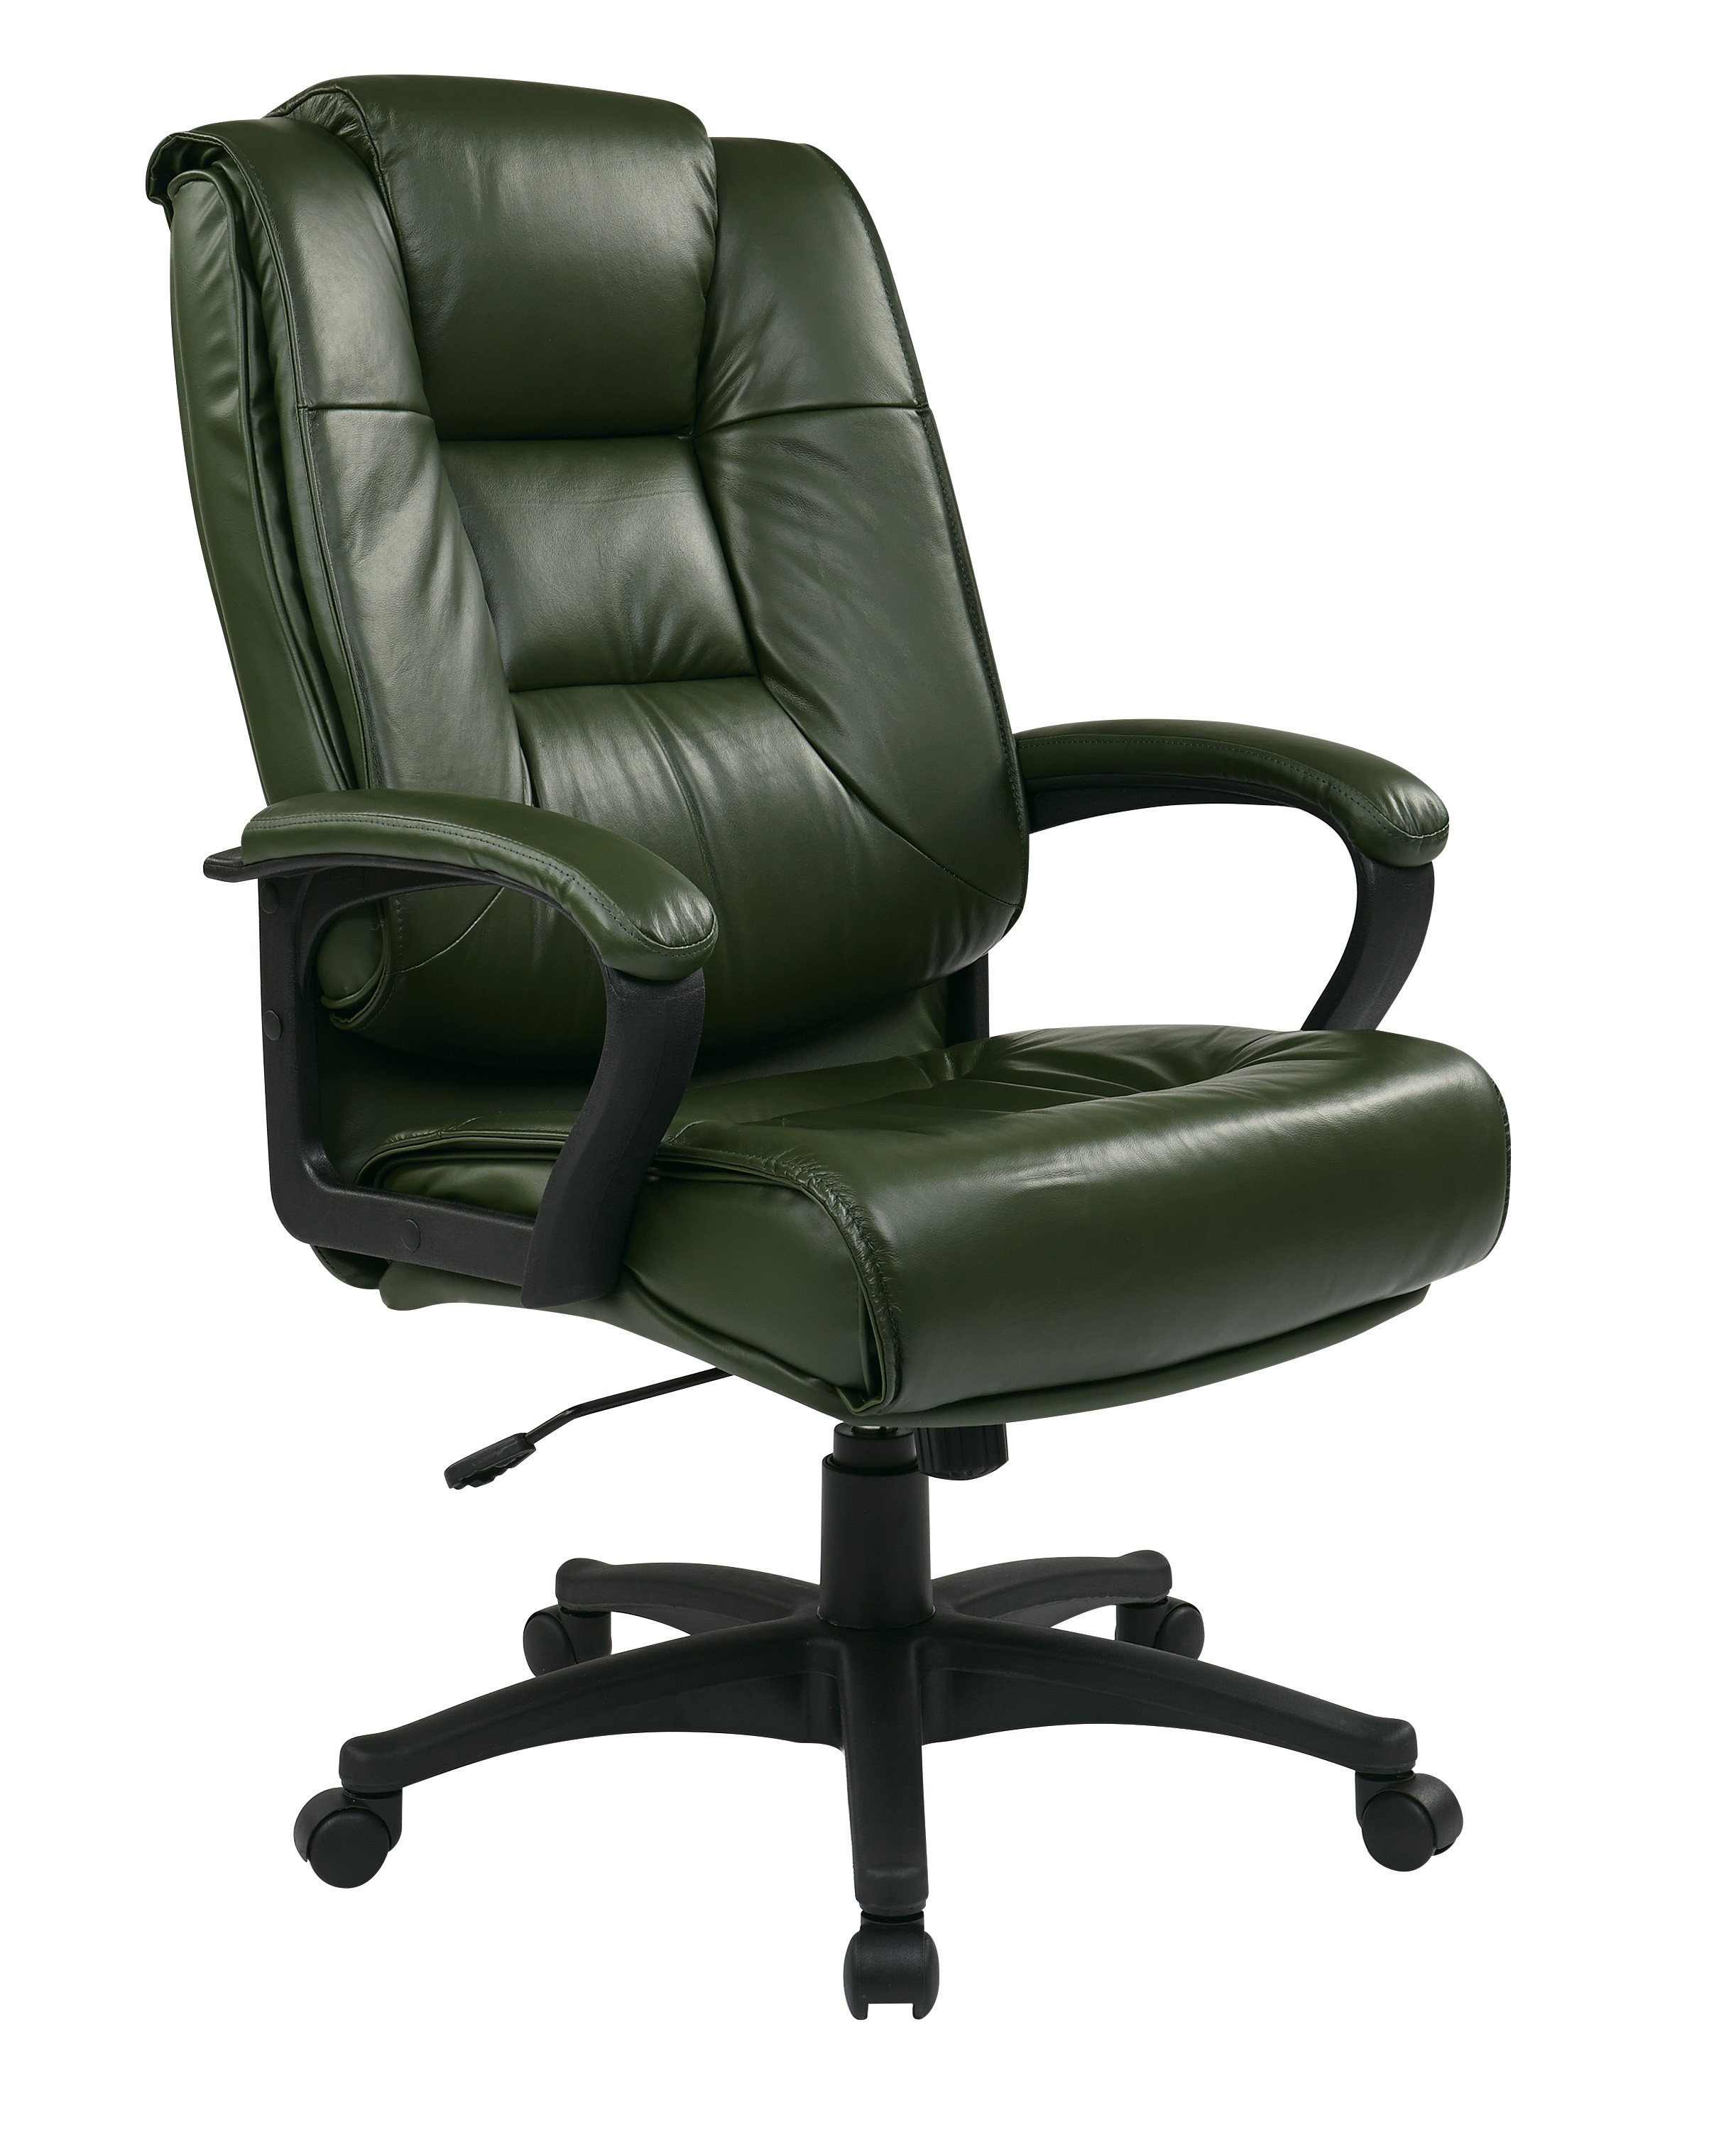 Executive high back leather chair